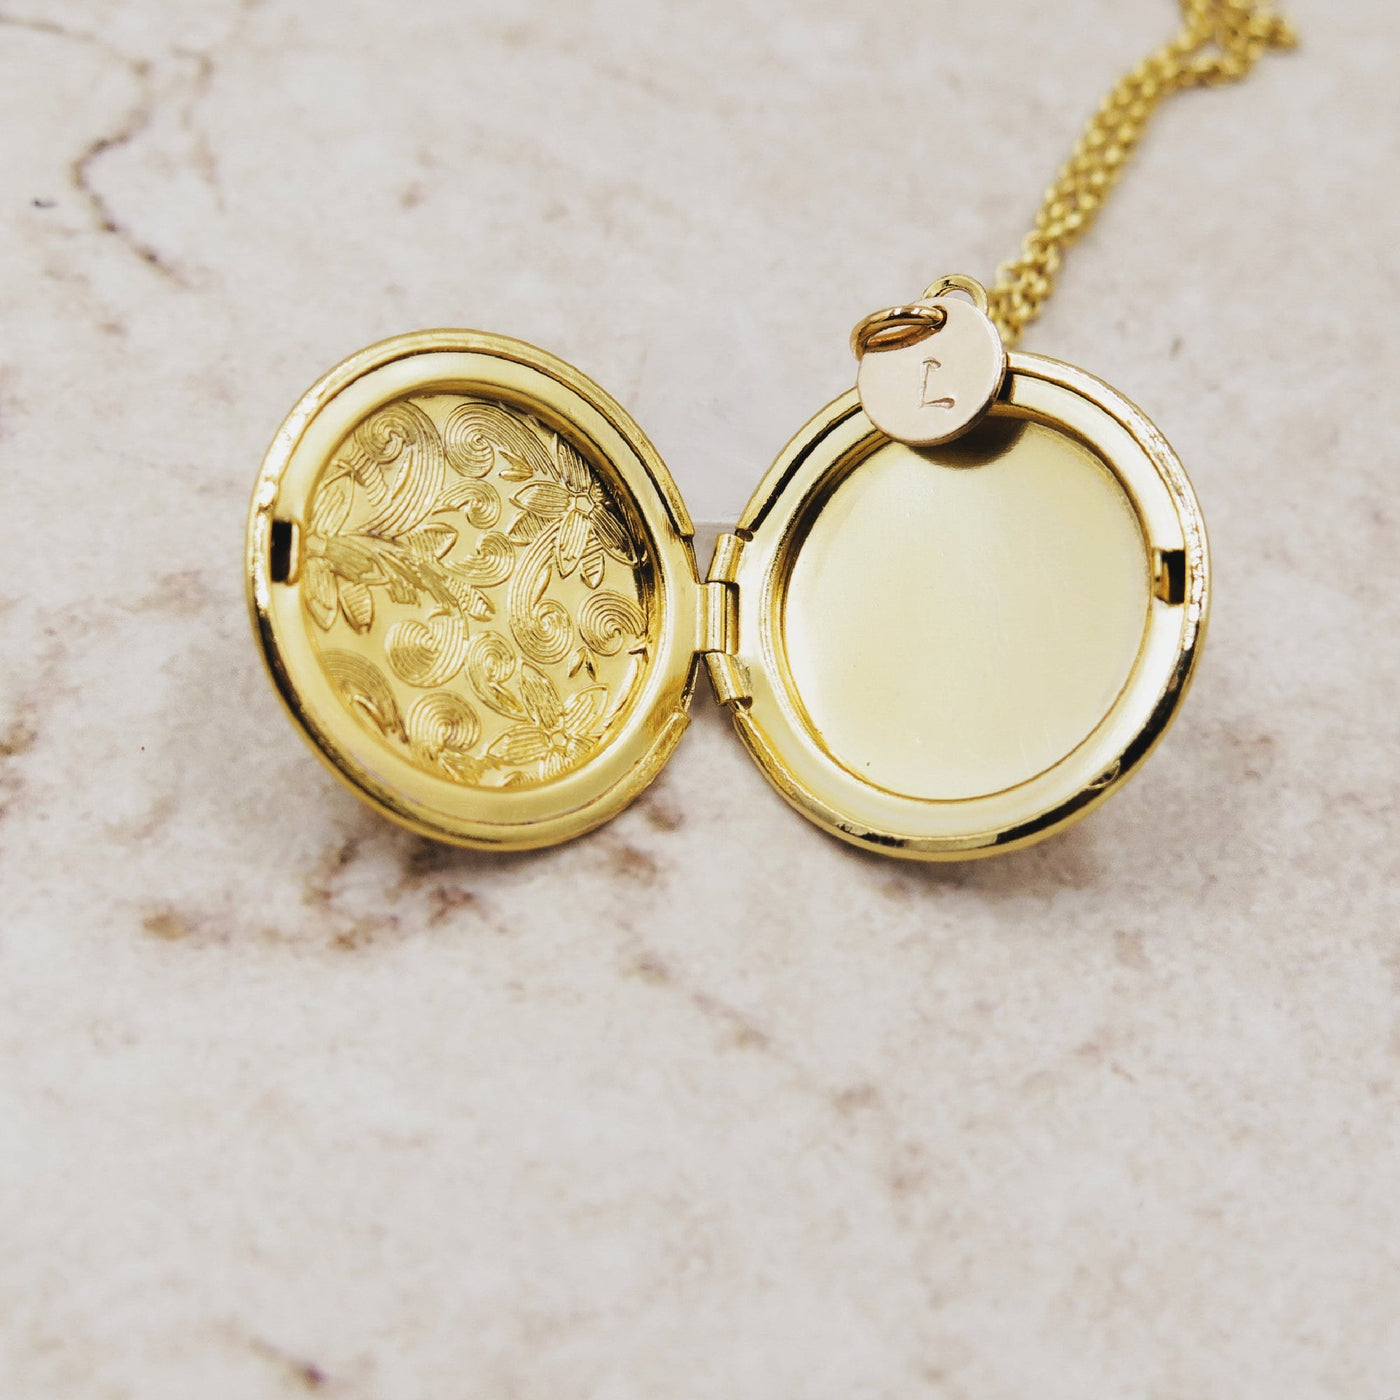 Gold Floral Locket with Personalized Charm and Photos